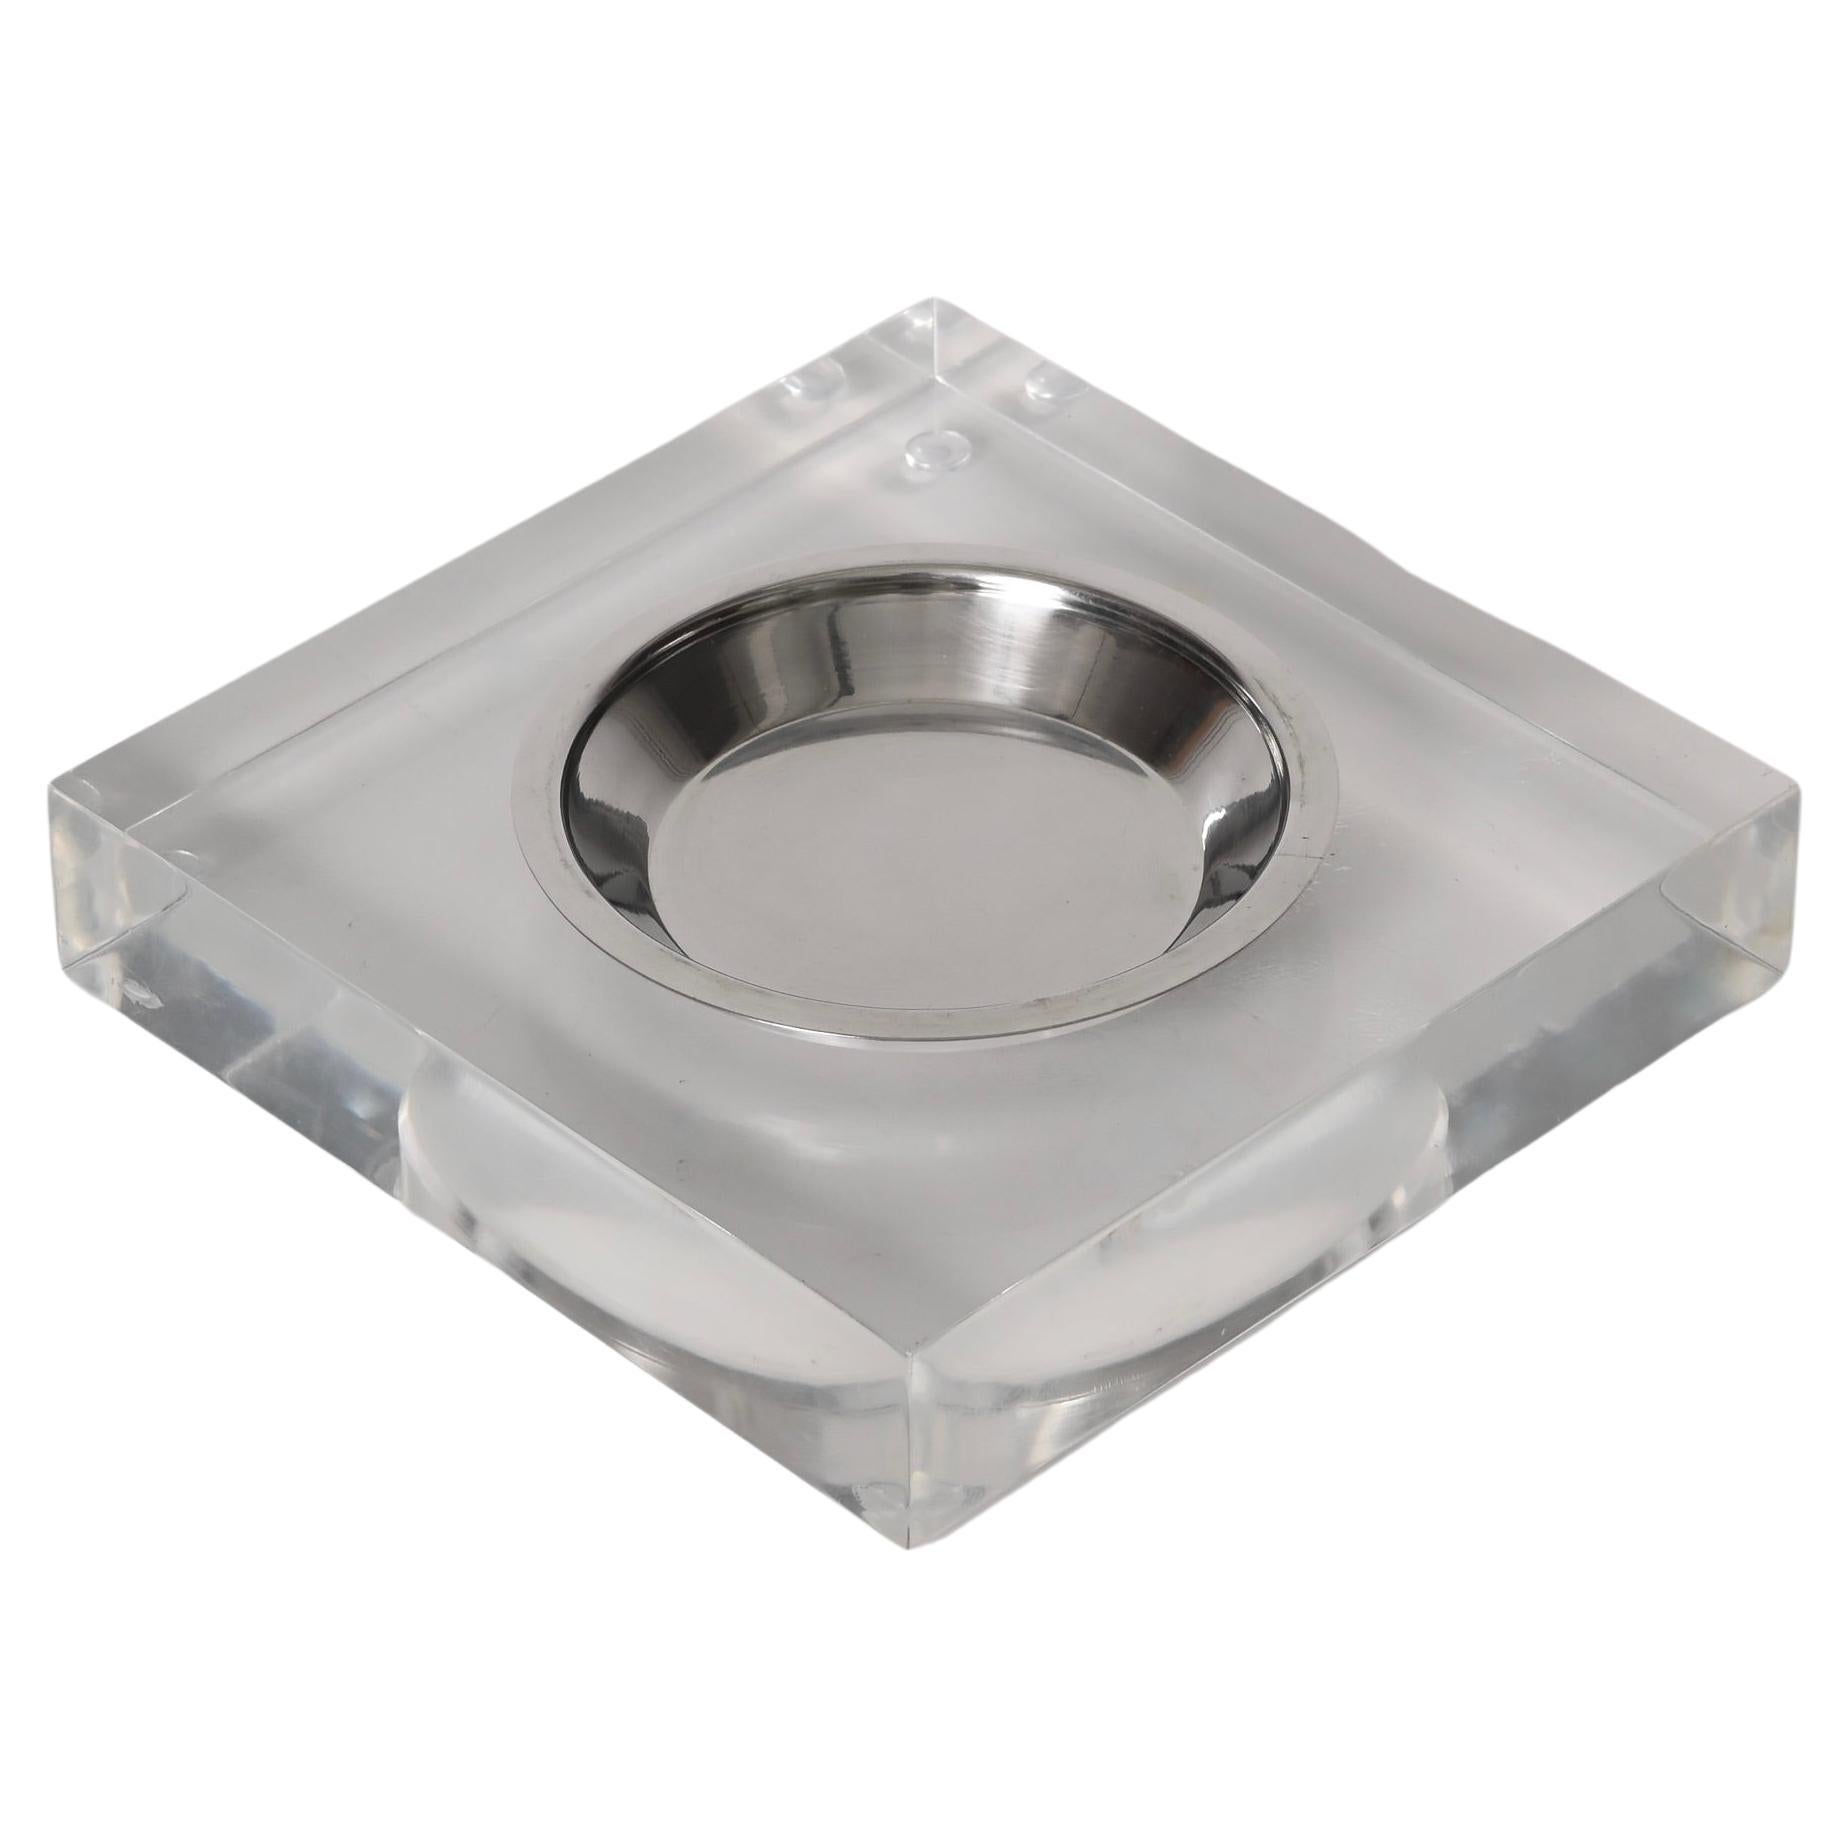 Amazing crystal lucite and chrome pocket emptier or ashtray. This fantastic piece was designed in Italy during the 1970s in the style of Willy Rizzo.

This ashtray is lovely because of the beautiful straight lines and the chromed metal central part,